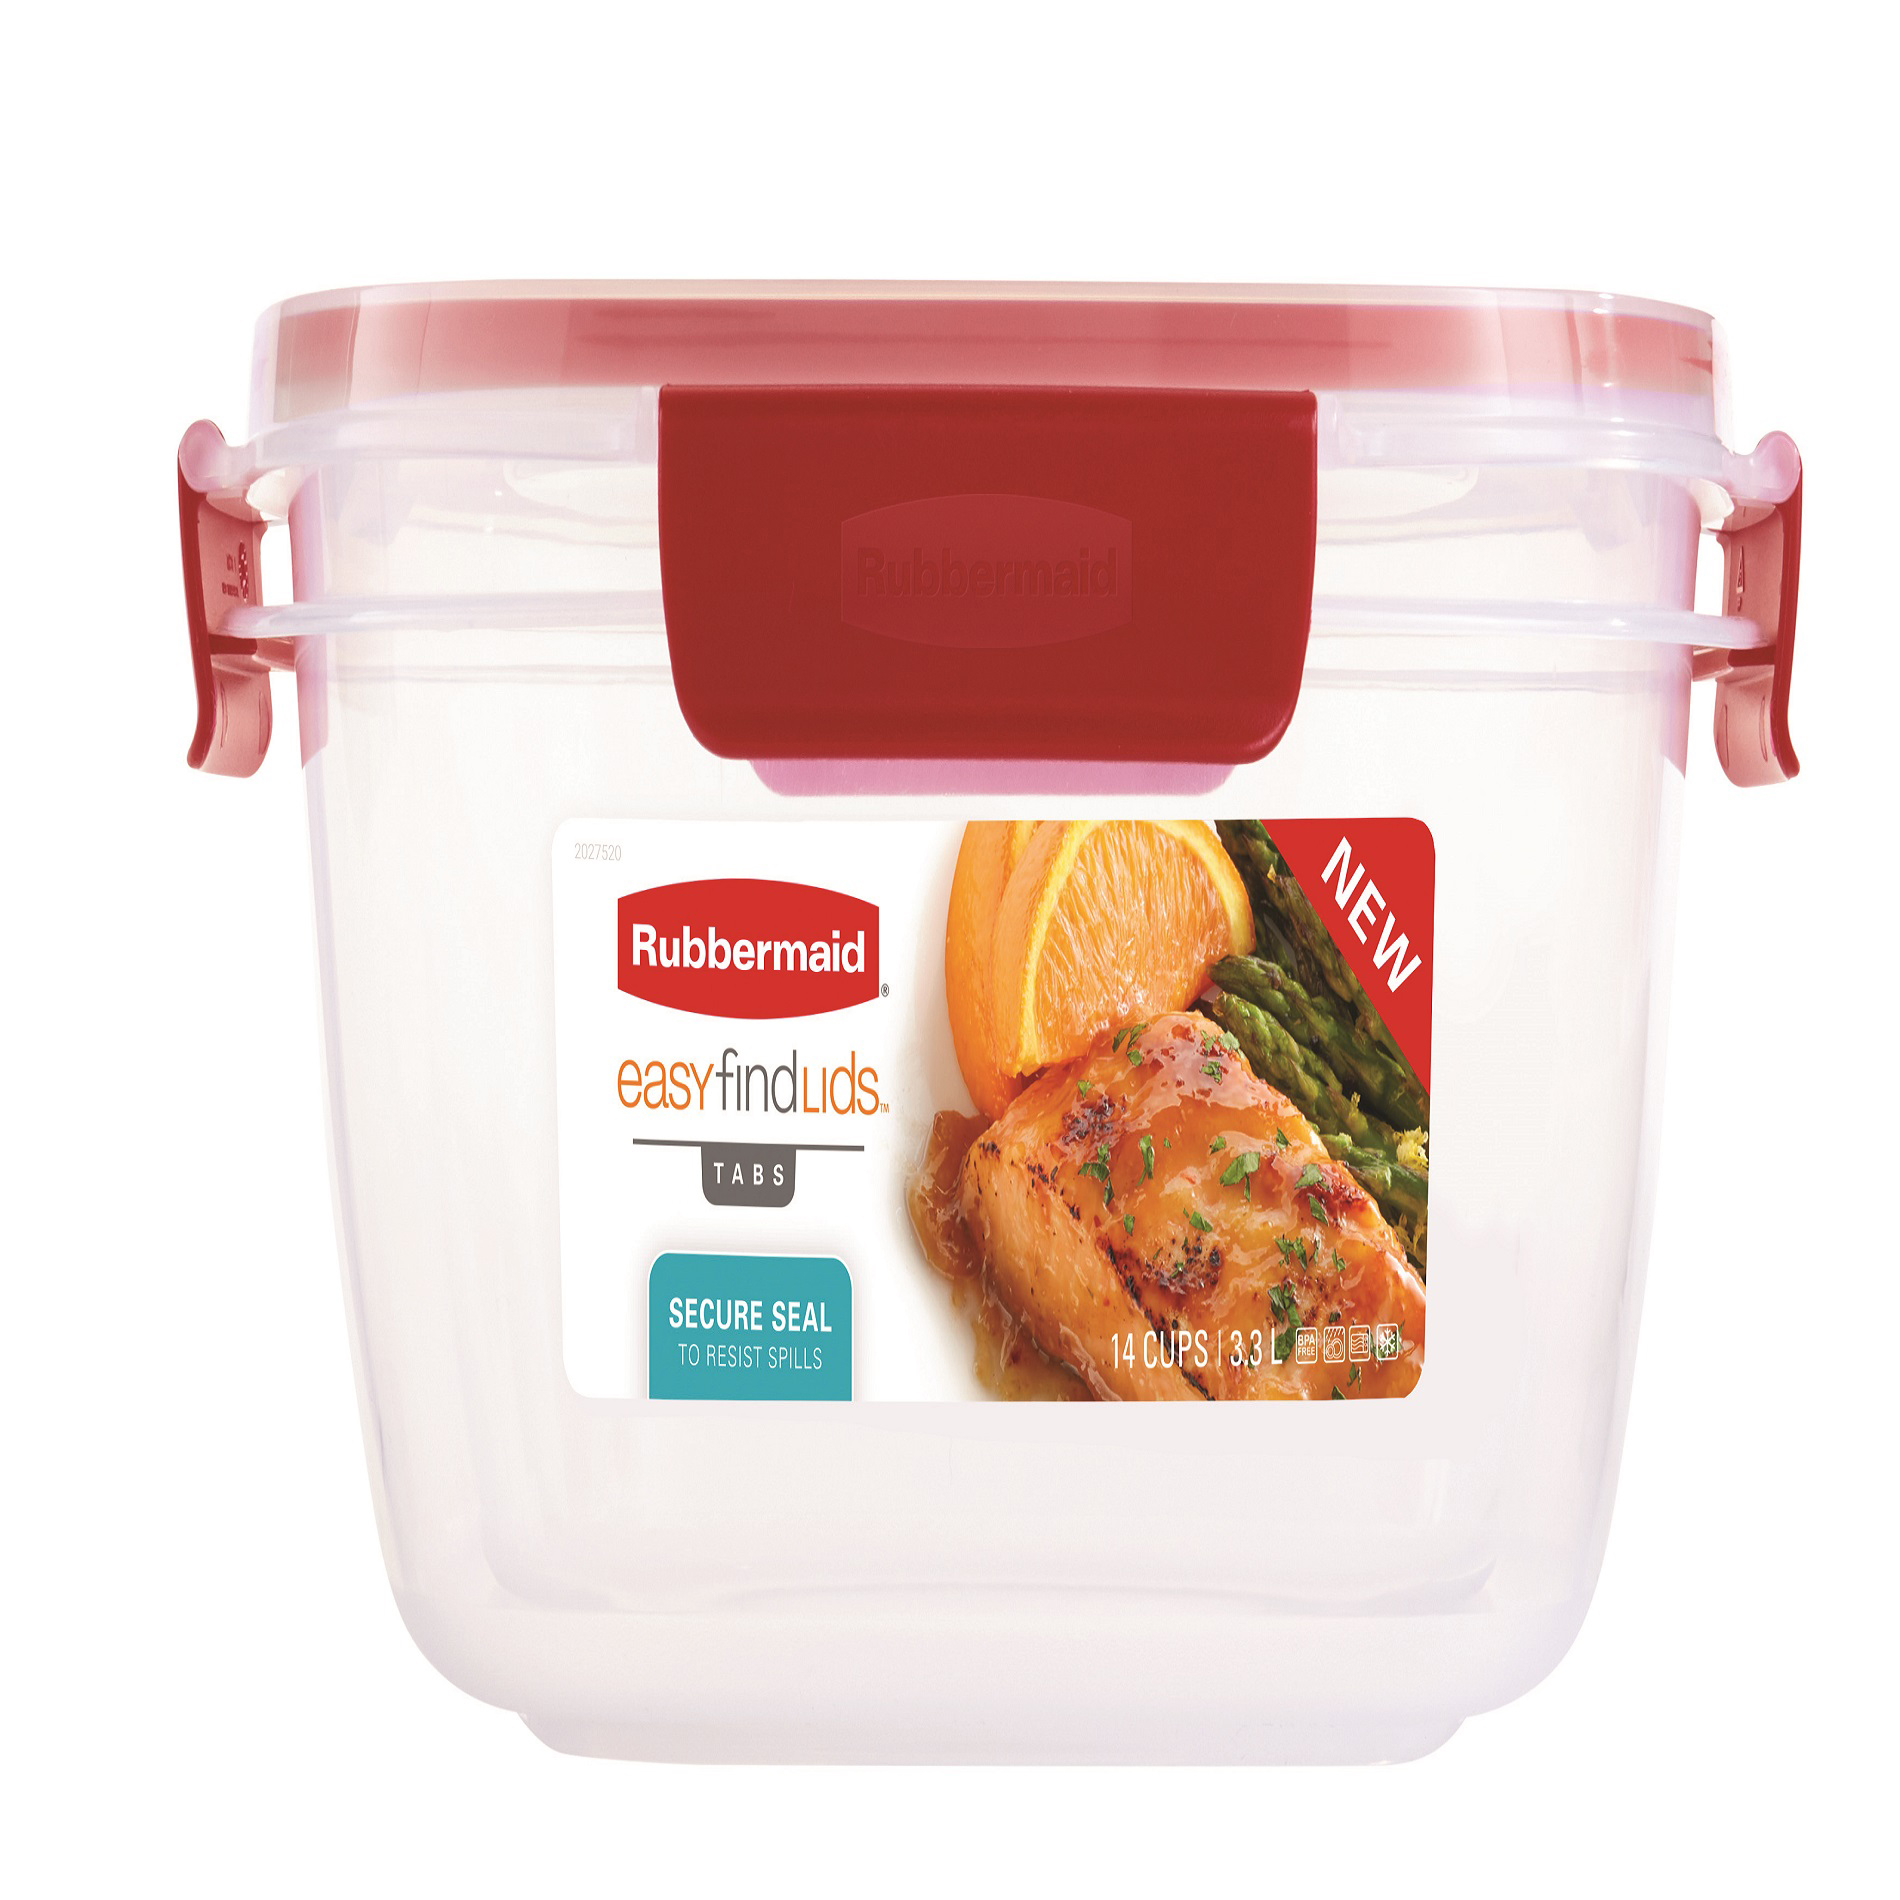 Rubbermaid Easy Find Lid Food Storage Container